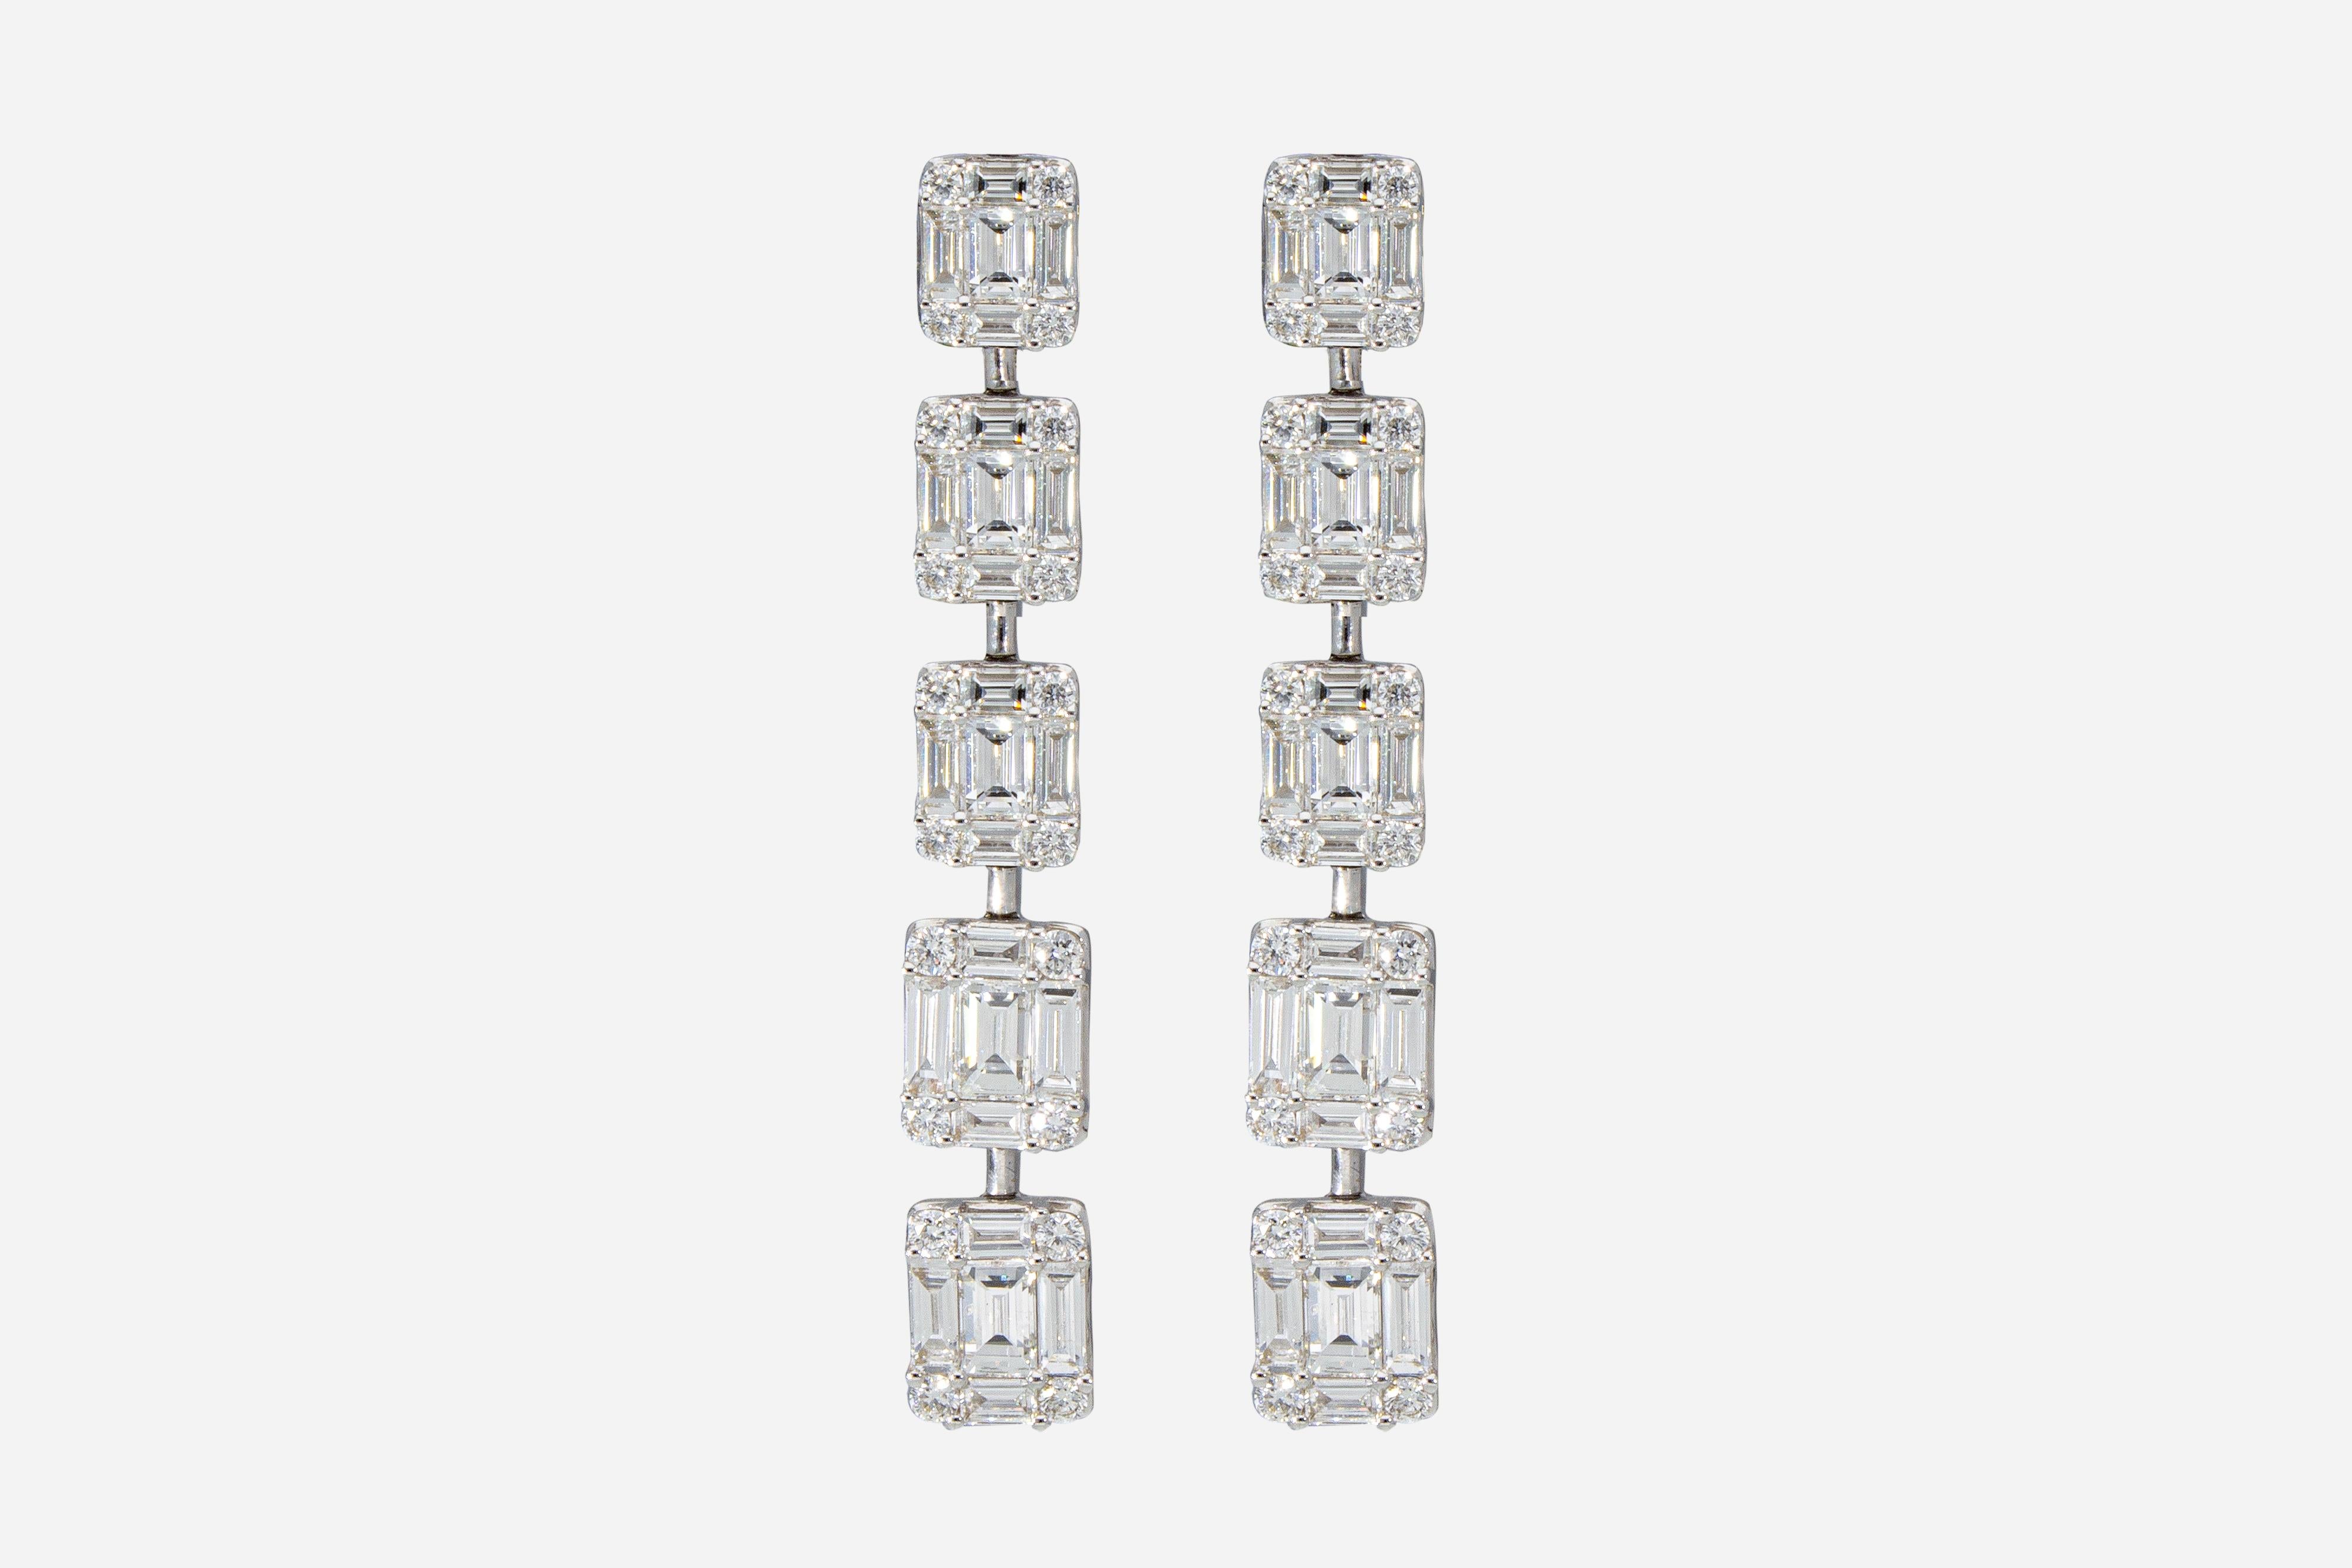 The earrings are made up of 10 graduated rectangular elements. 
Each element is set with 4 brilliant-cut diamonds and 5 baguette-cut diamonds. 
Total number of brilliants: n ° 90 
Total carat weight: 3.65 ct
The earrings are in 18 Kt white gold
The